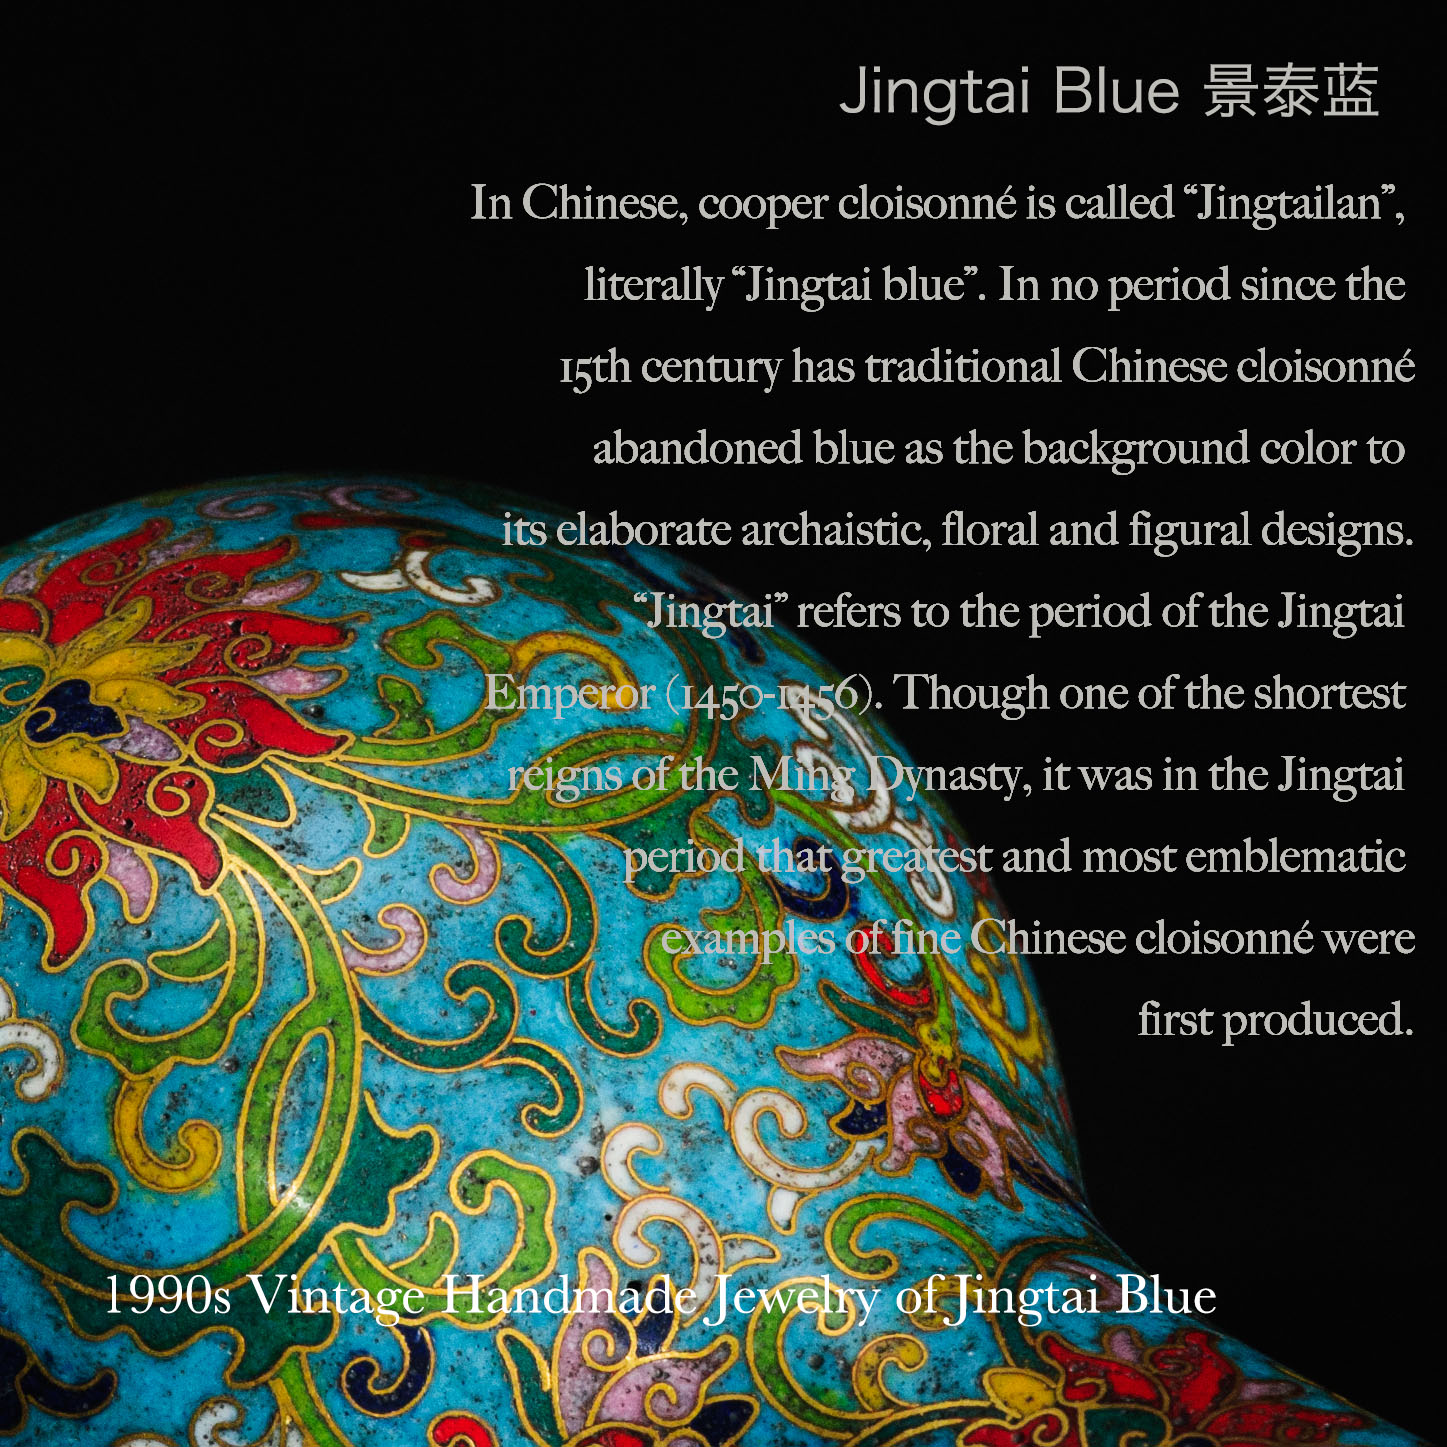 In Chinese, cooper cloisonné is called “Jingtailan”,  literally “Jingtai blue”. In no period since the  15th century has traditional Chinese cloisonné  abandoned blue as the background color to its elaborate archaistic, floral and figural designs.  “Jingtai” refers to the period of the Jingtai  Emperor (1450-1456). Though one of the shortest  reigns of the Ming Dynasty, it was in the Jingtai  period that the greatest and most emblematic  examples of fine Chinese cloisonné were  first produced.